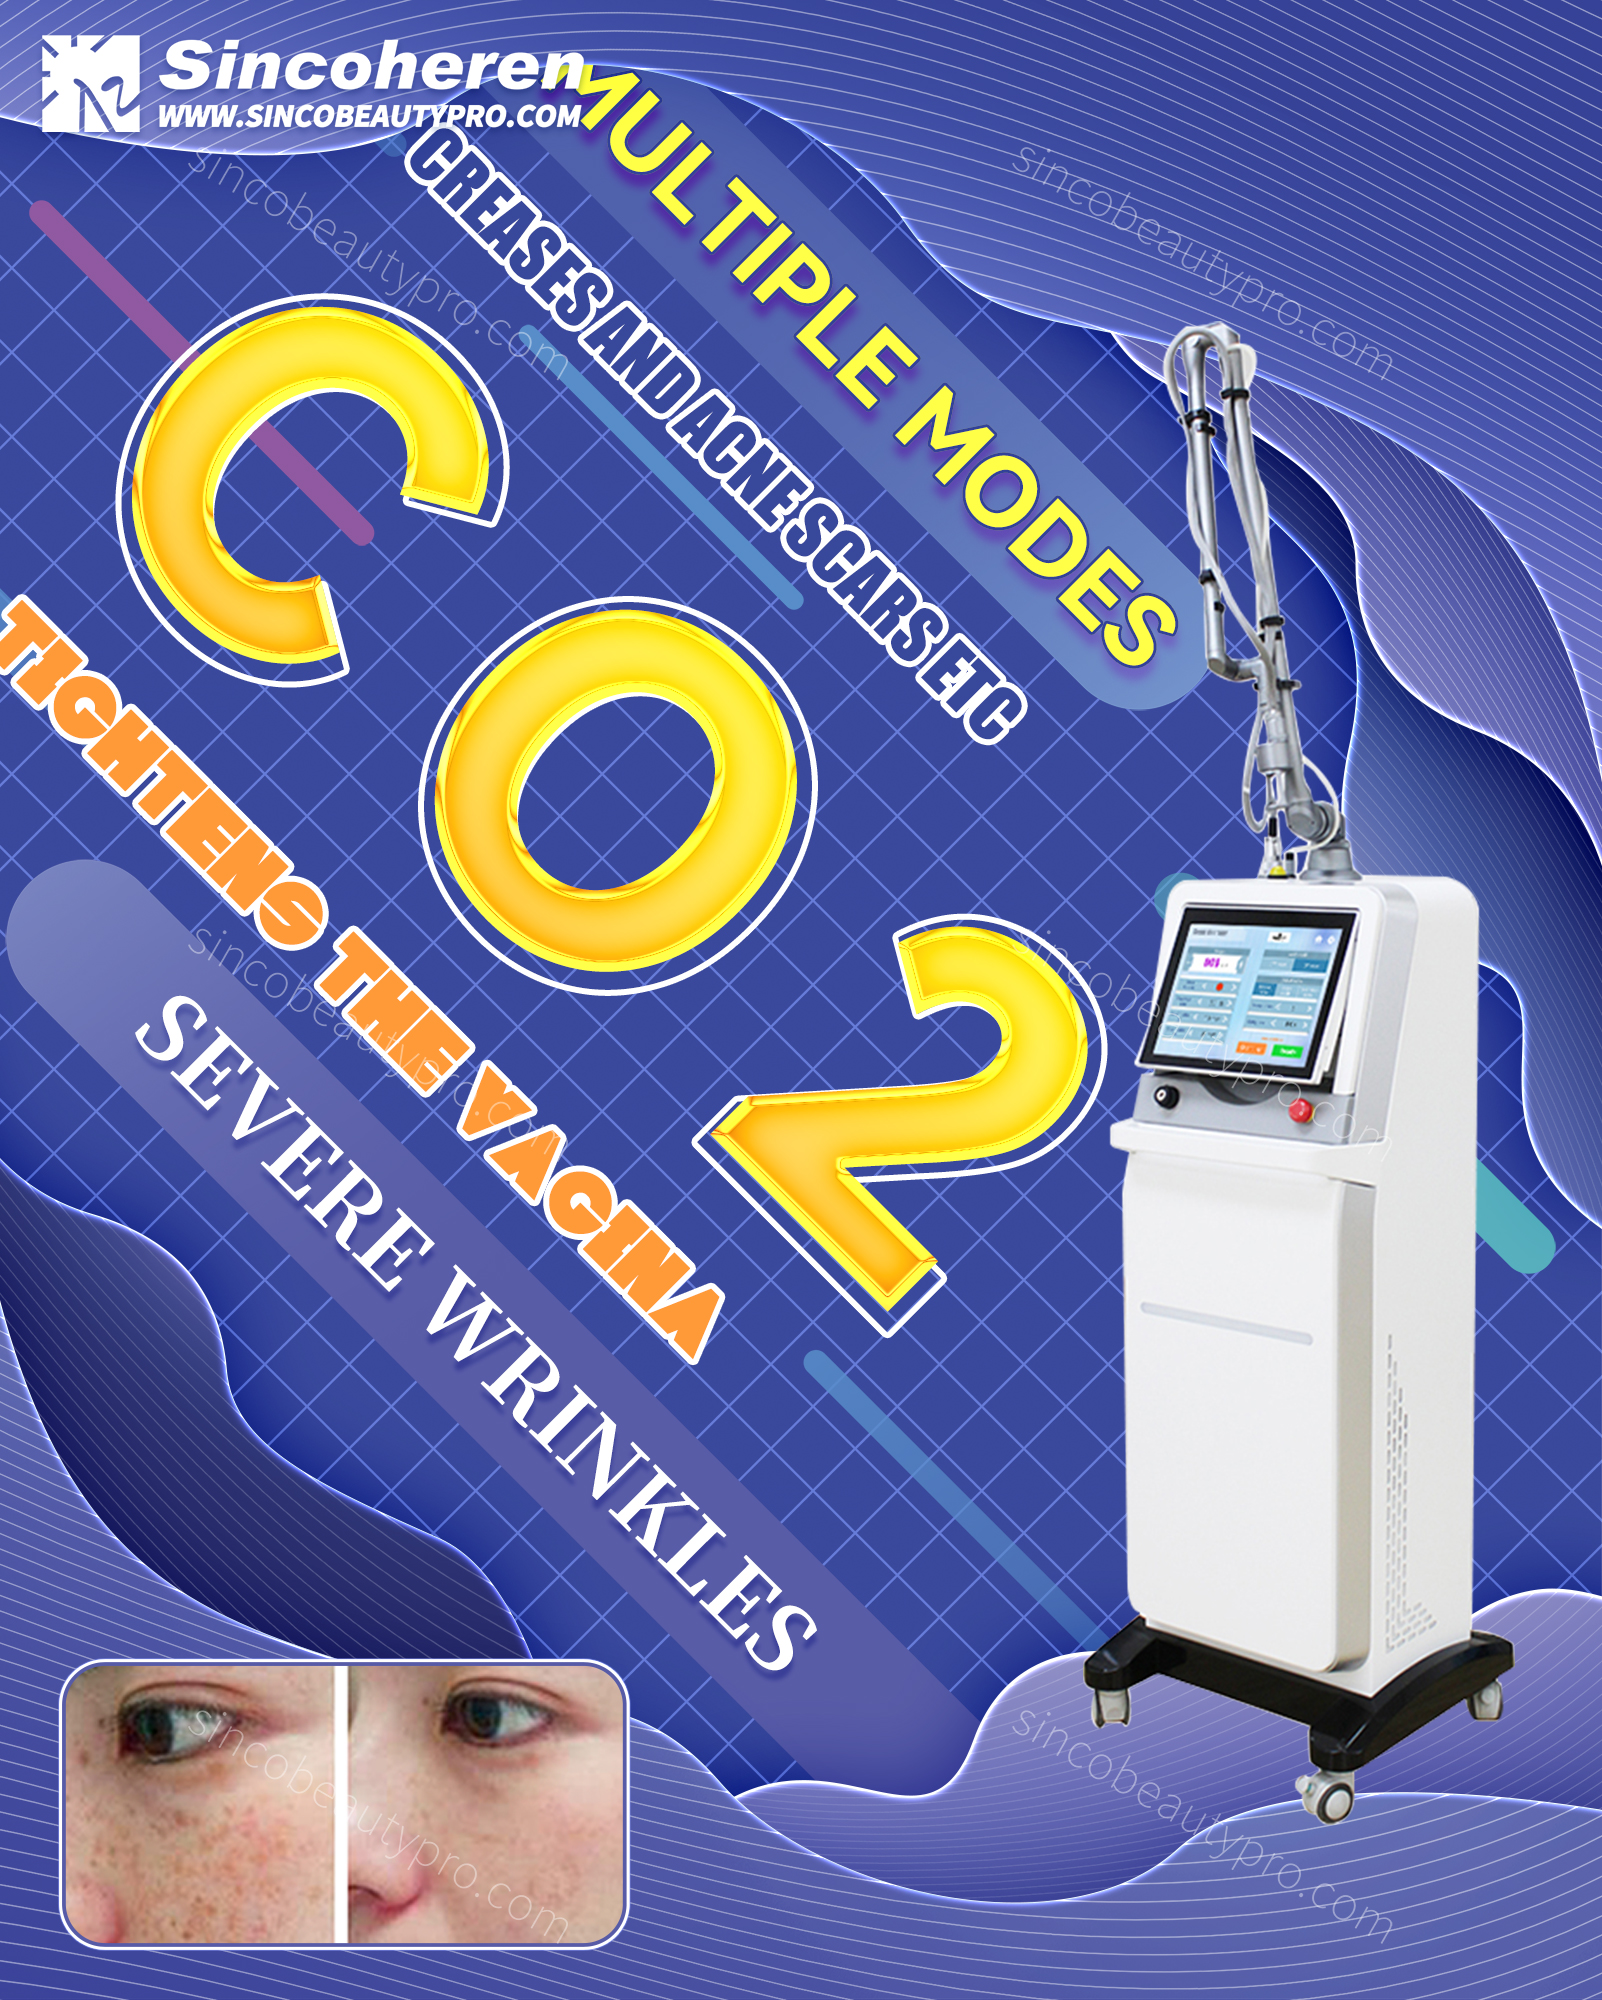 What is Fractional CO2 Laser?